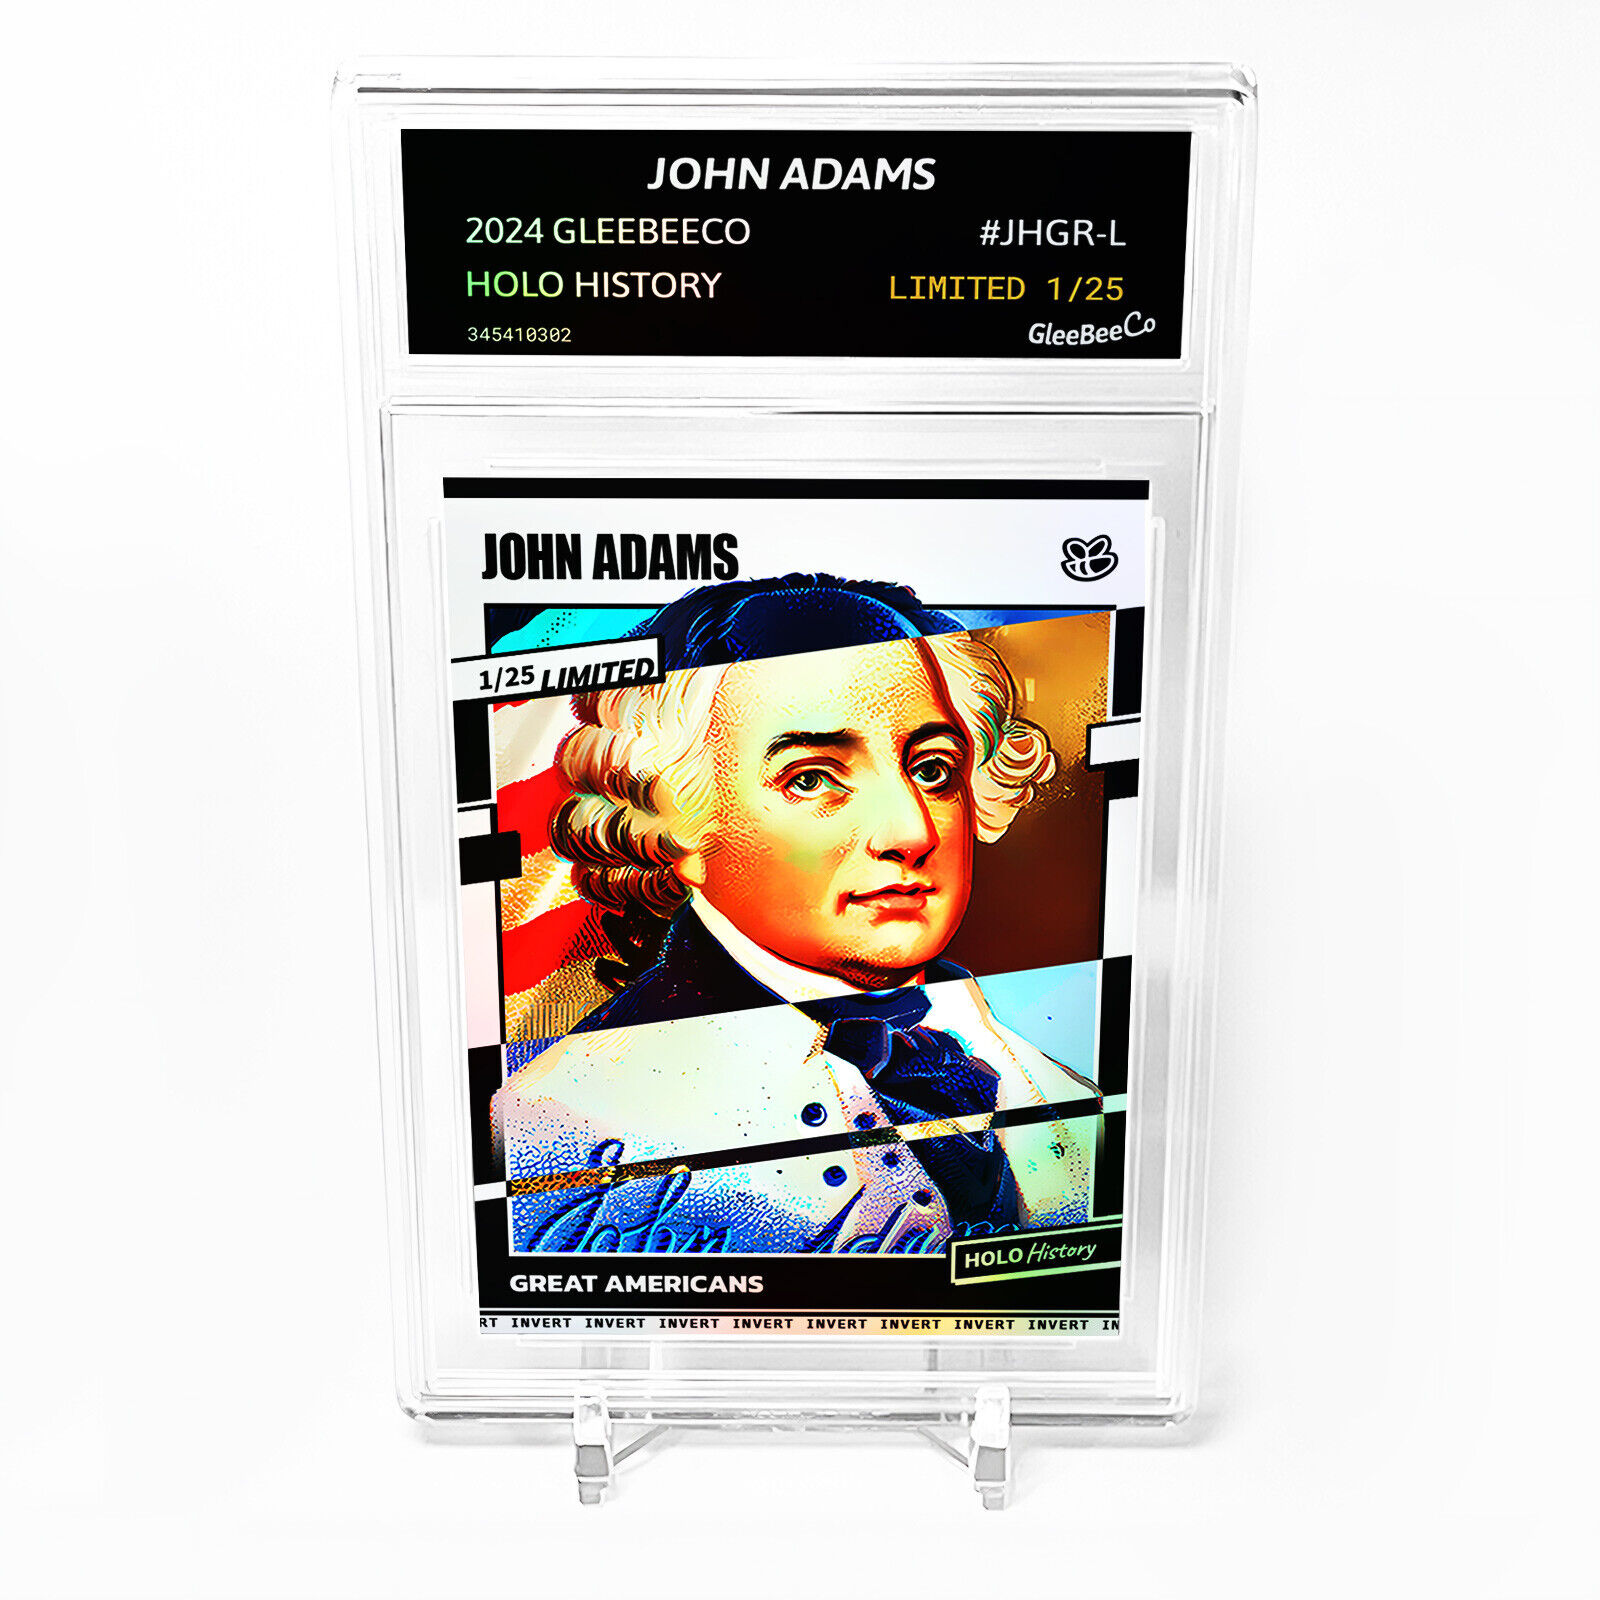 JOHN ADAMS Card 2024 GleeBeeCo Holo History *INVERT* #JHGR-L Limited to Only /25